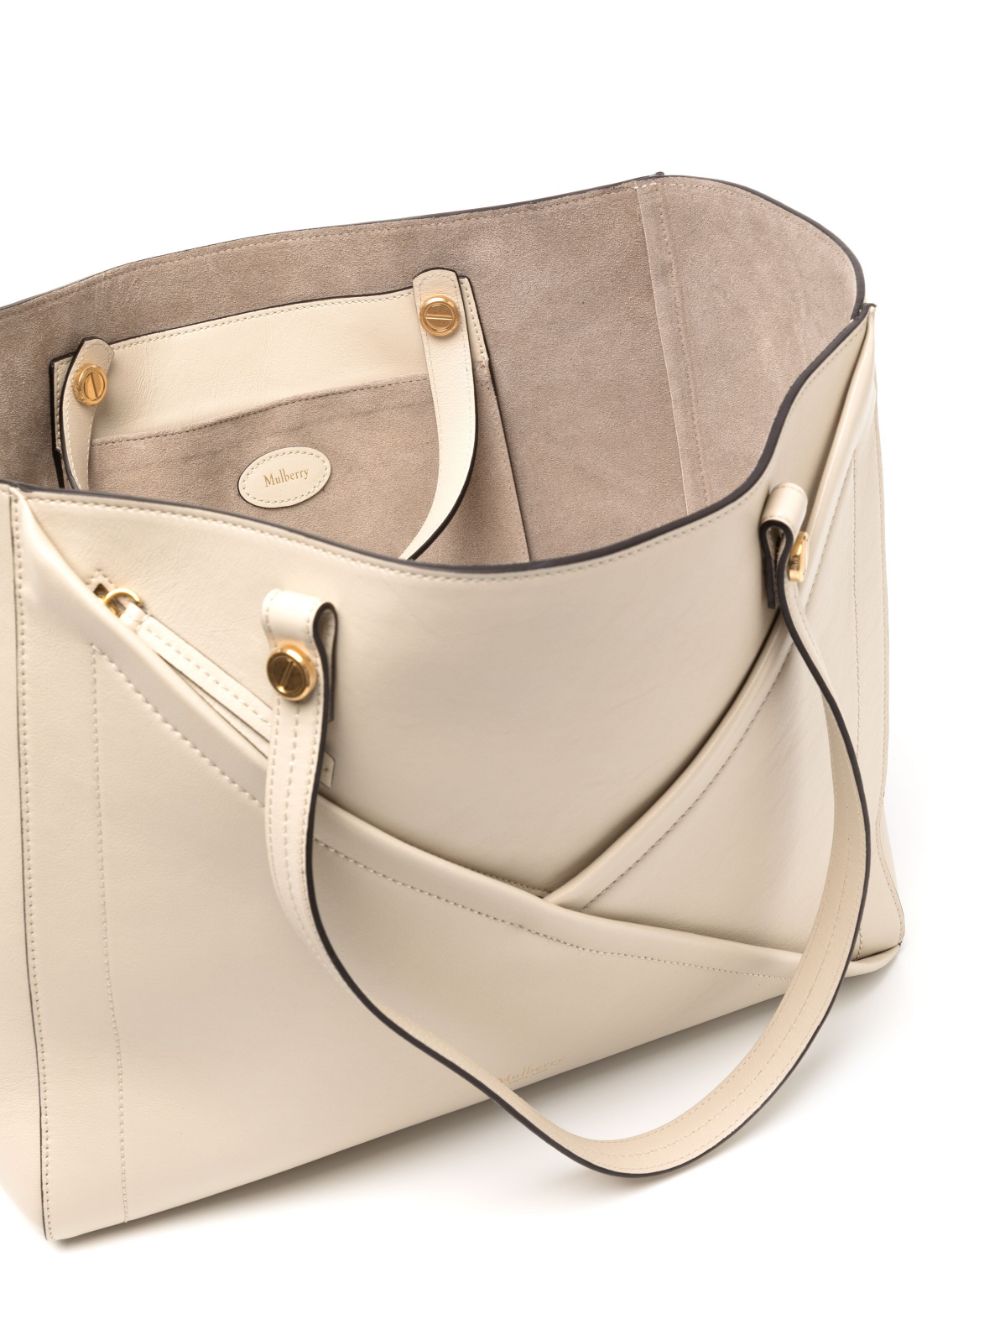 Mulberry M Zipped Leather Tote Bag - Farfetch